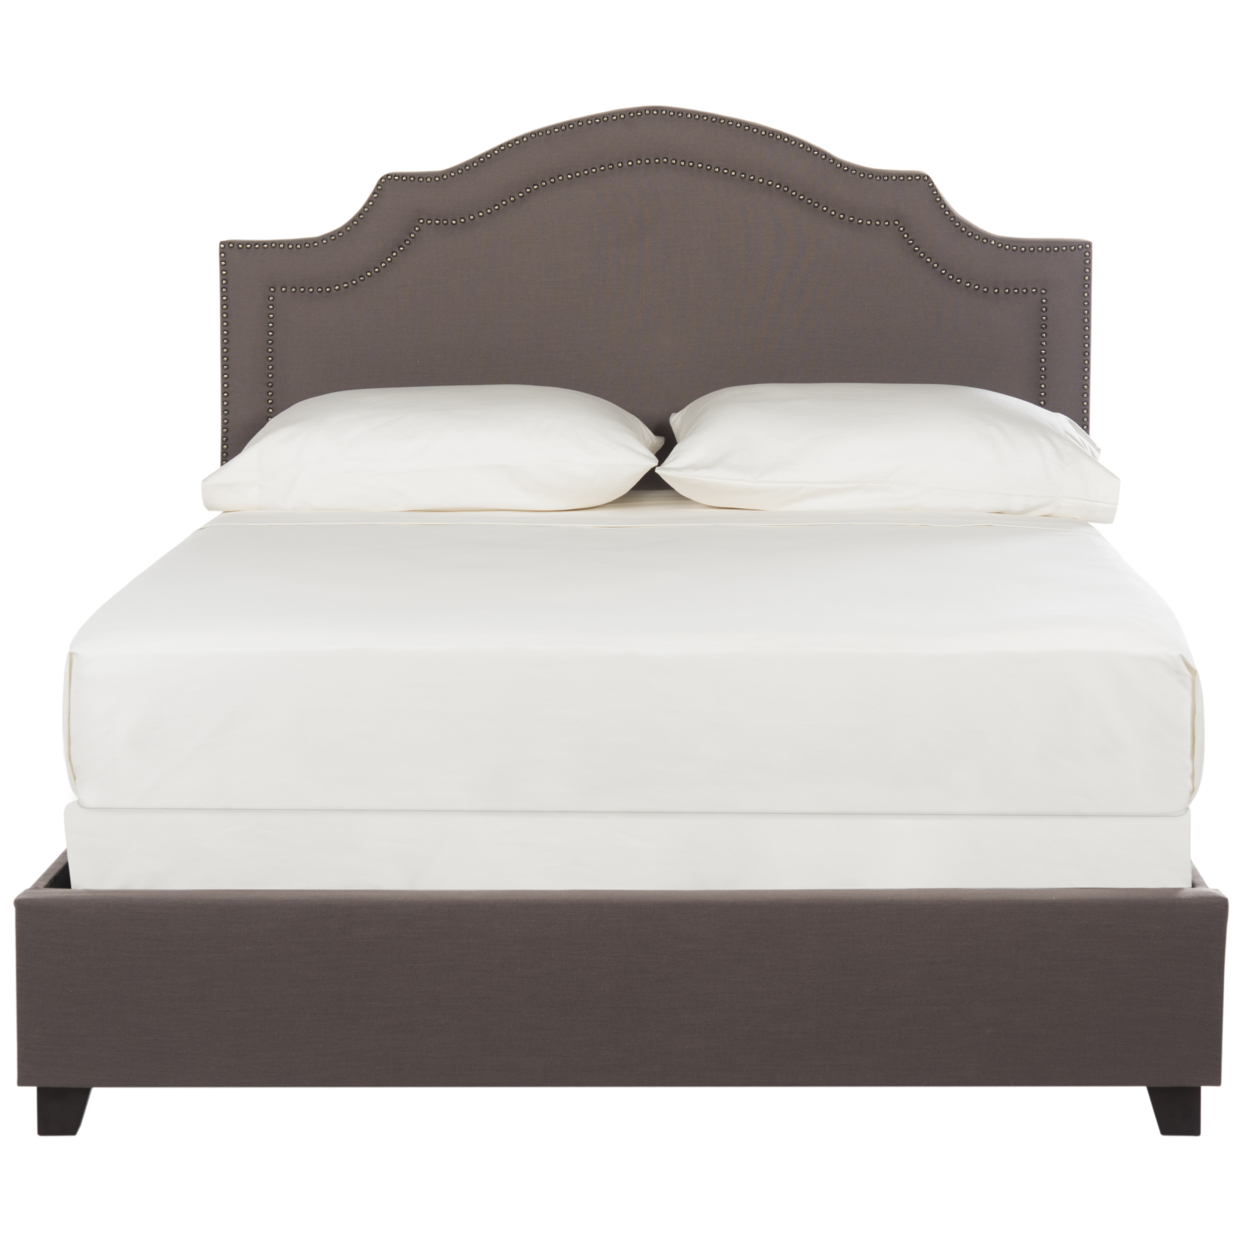 SAFAVIEH Theron Bed Dark Taupe Queen